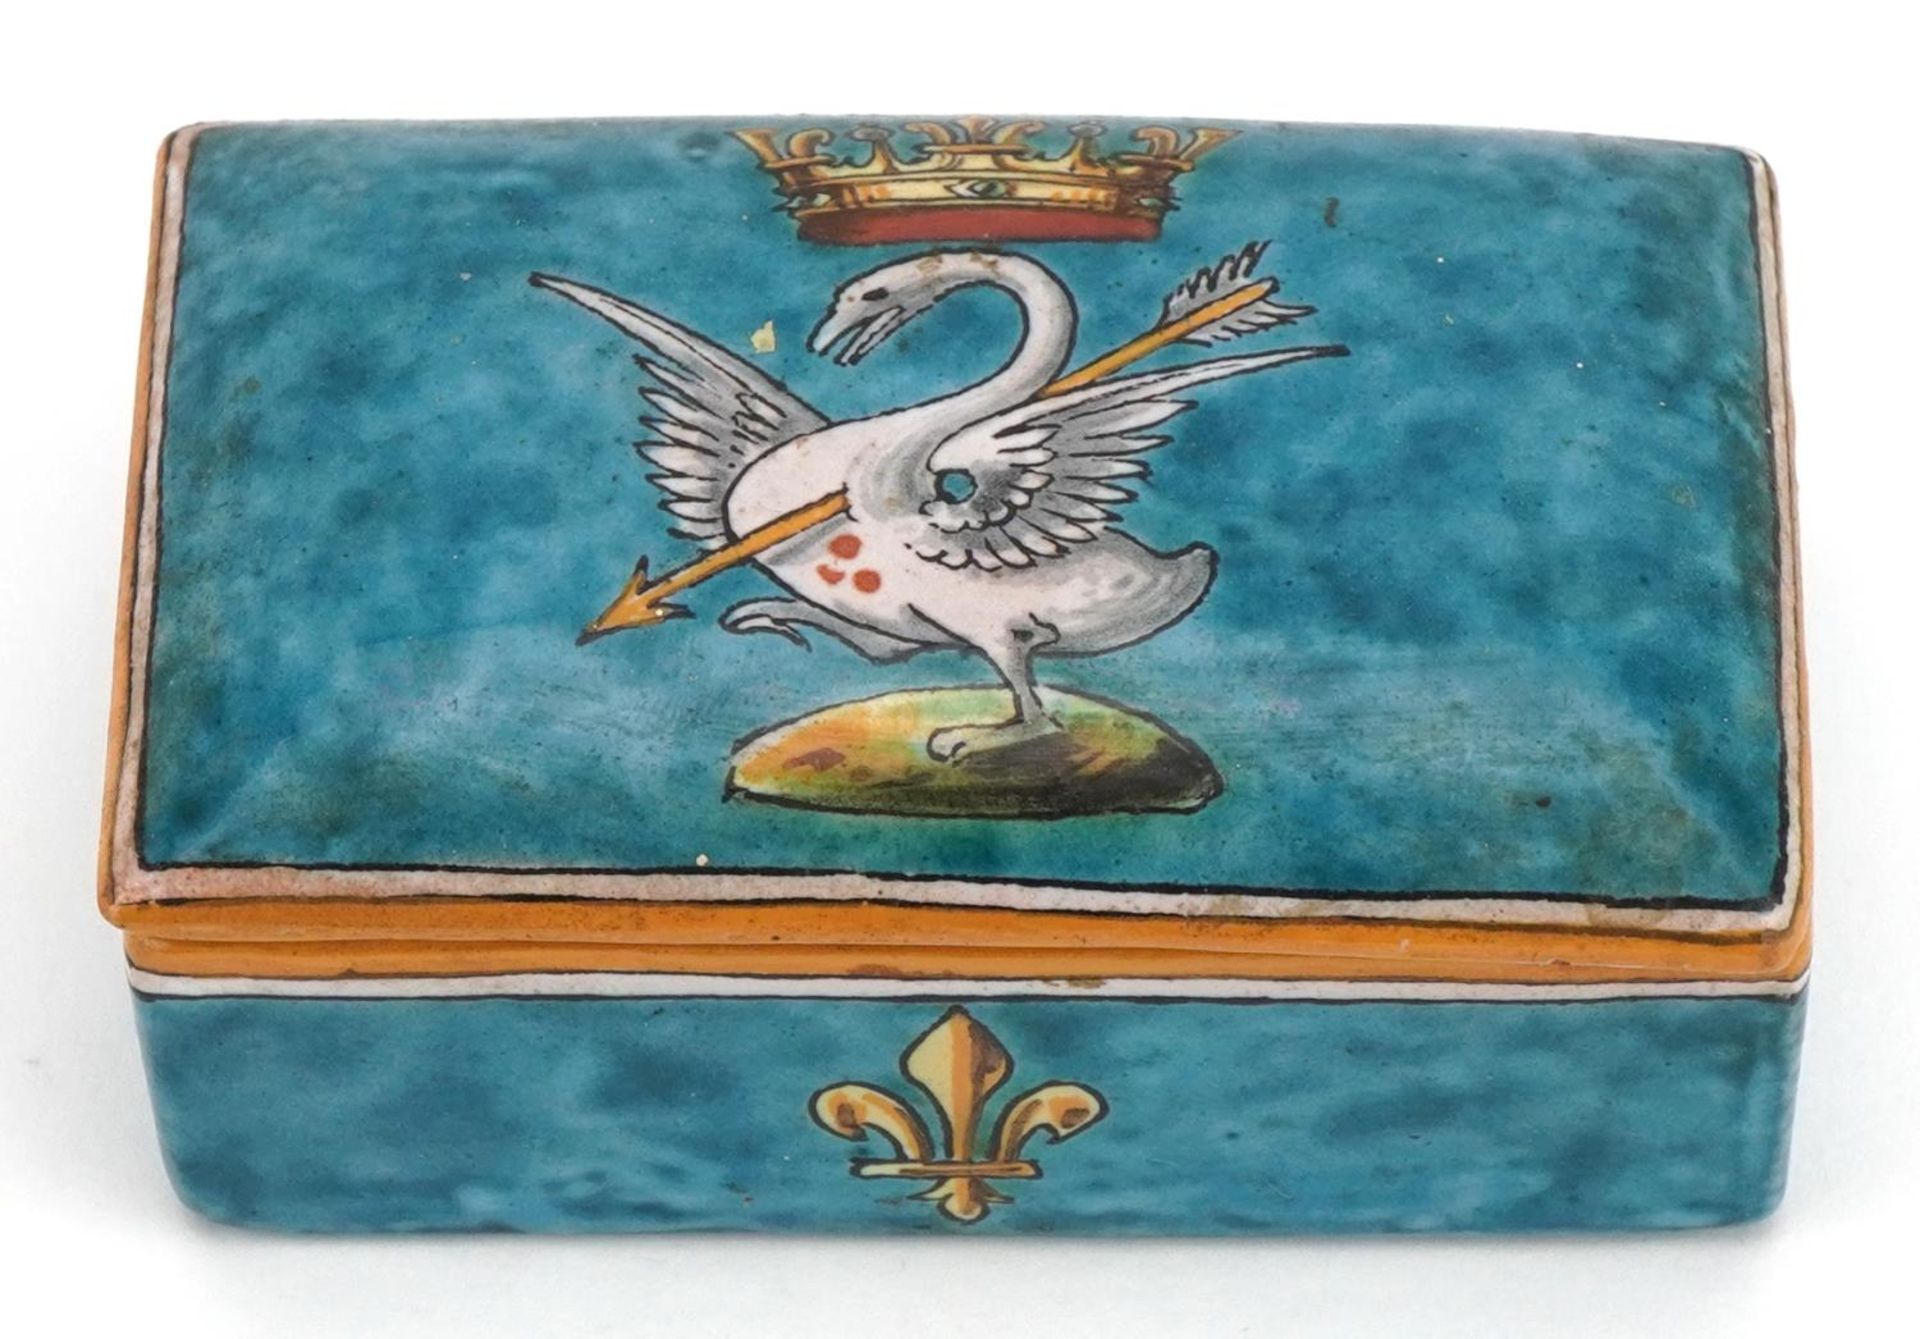 Ulysse Blois, 19th century French faience glazed pottery box and cover hand painted with fleur de - Image 3 of 8